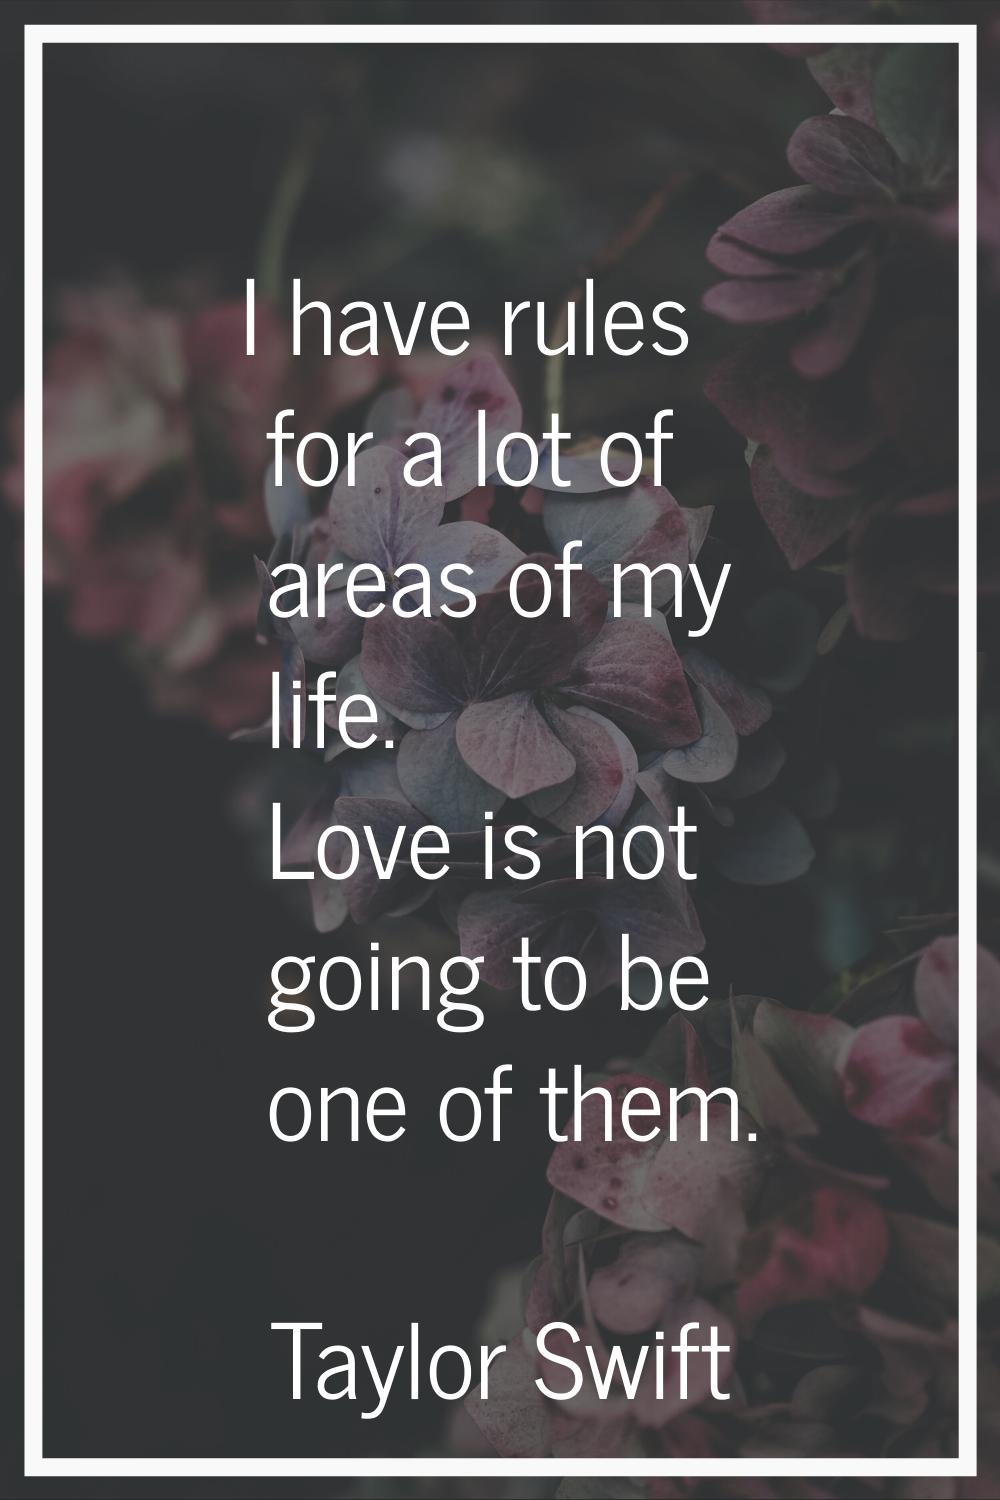 I have rules for a lot of areas of my life. Love is not going to be one of them.